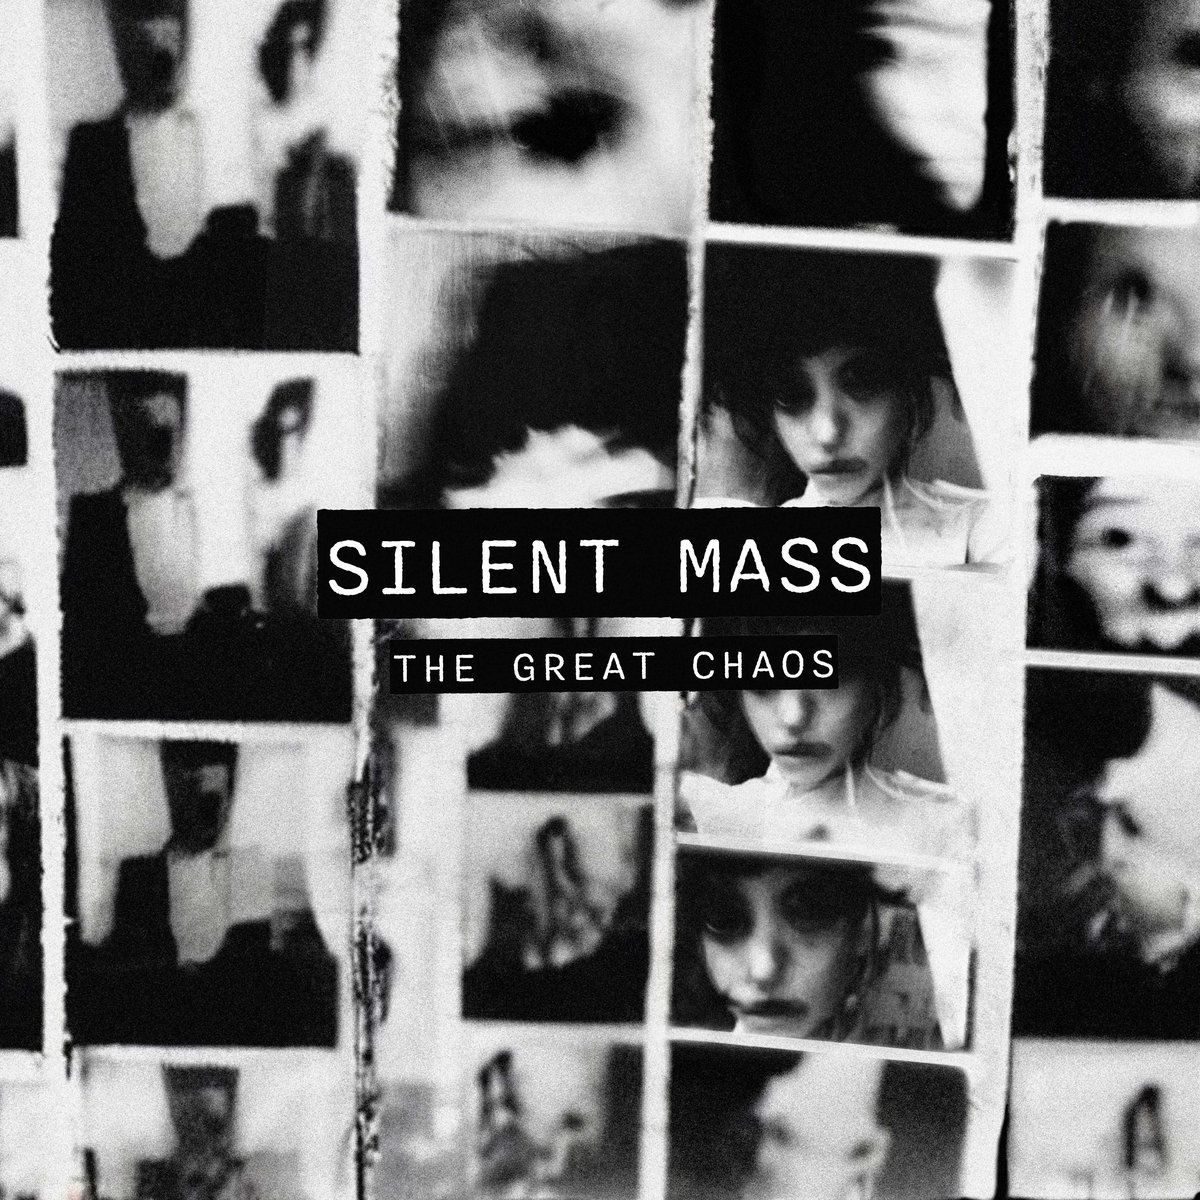 DEBUT ALBUM REVIEW: The Great Chaos by Silent Mass